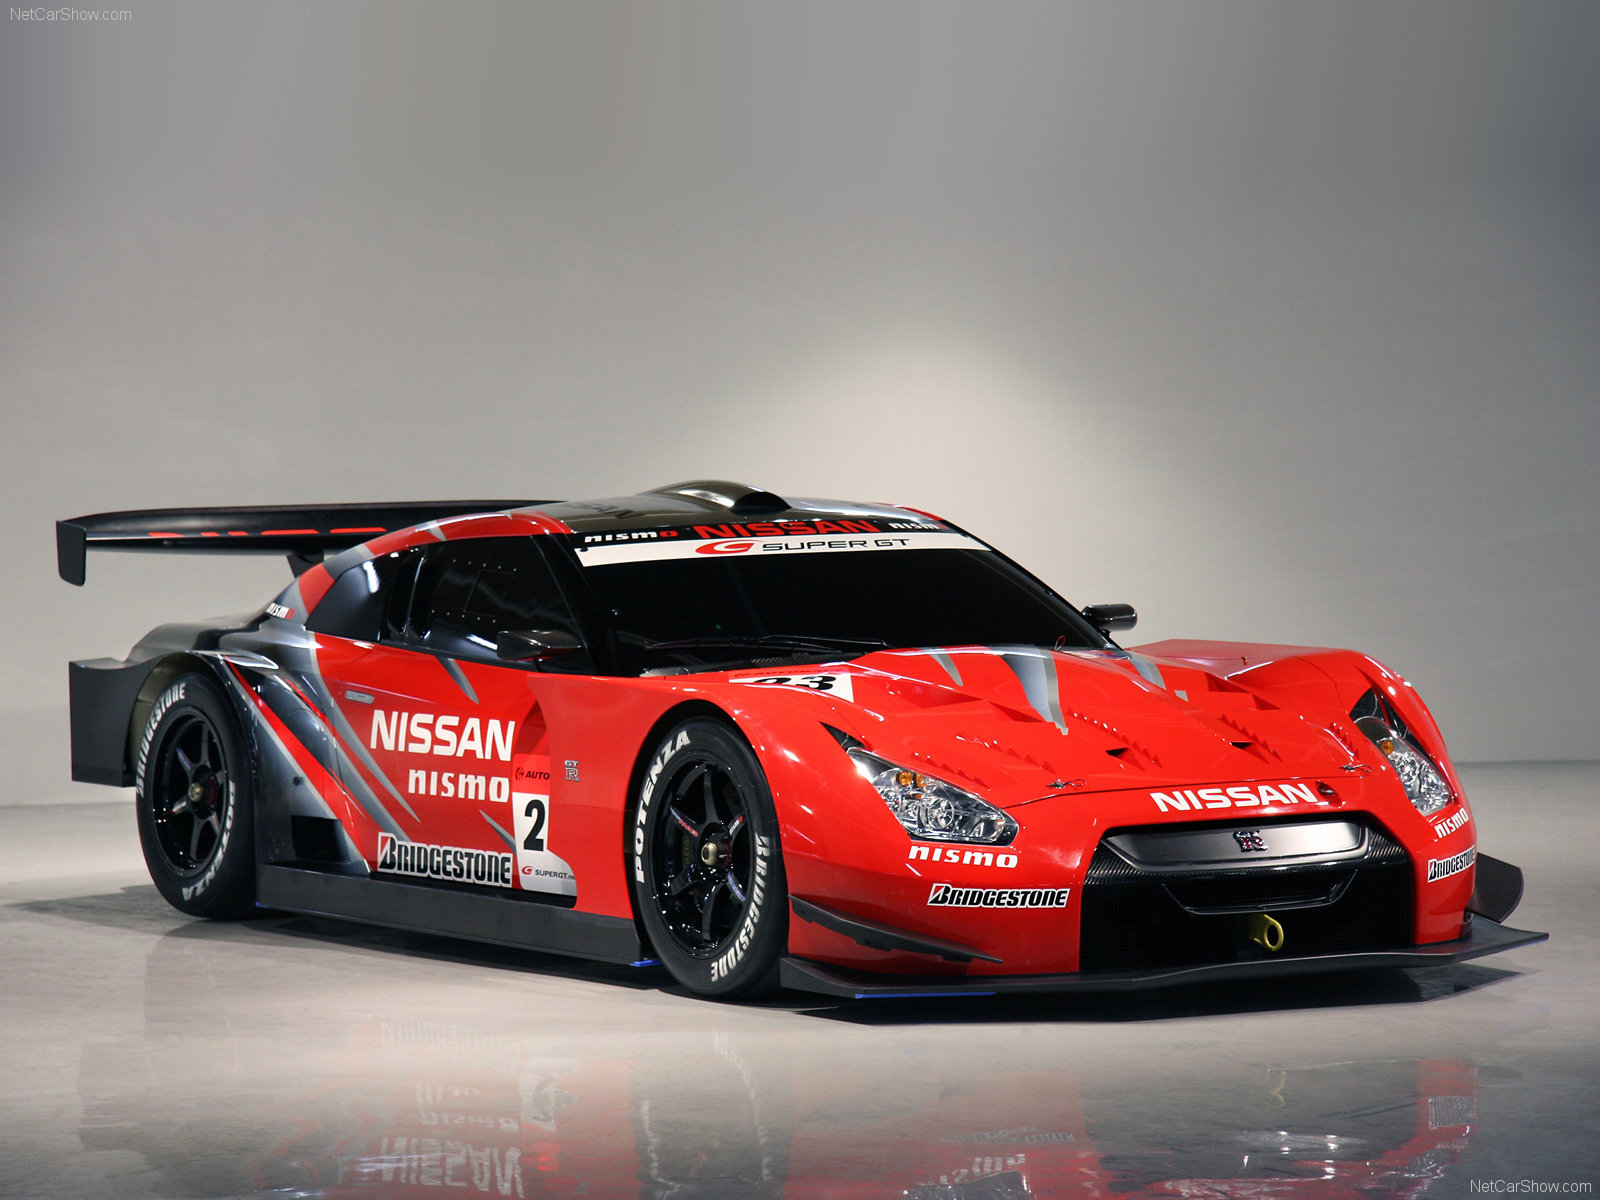 ... race car the gt500 specification nissan gt r racing car which will vie